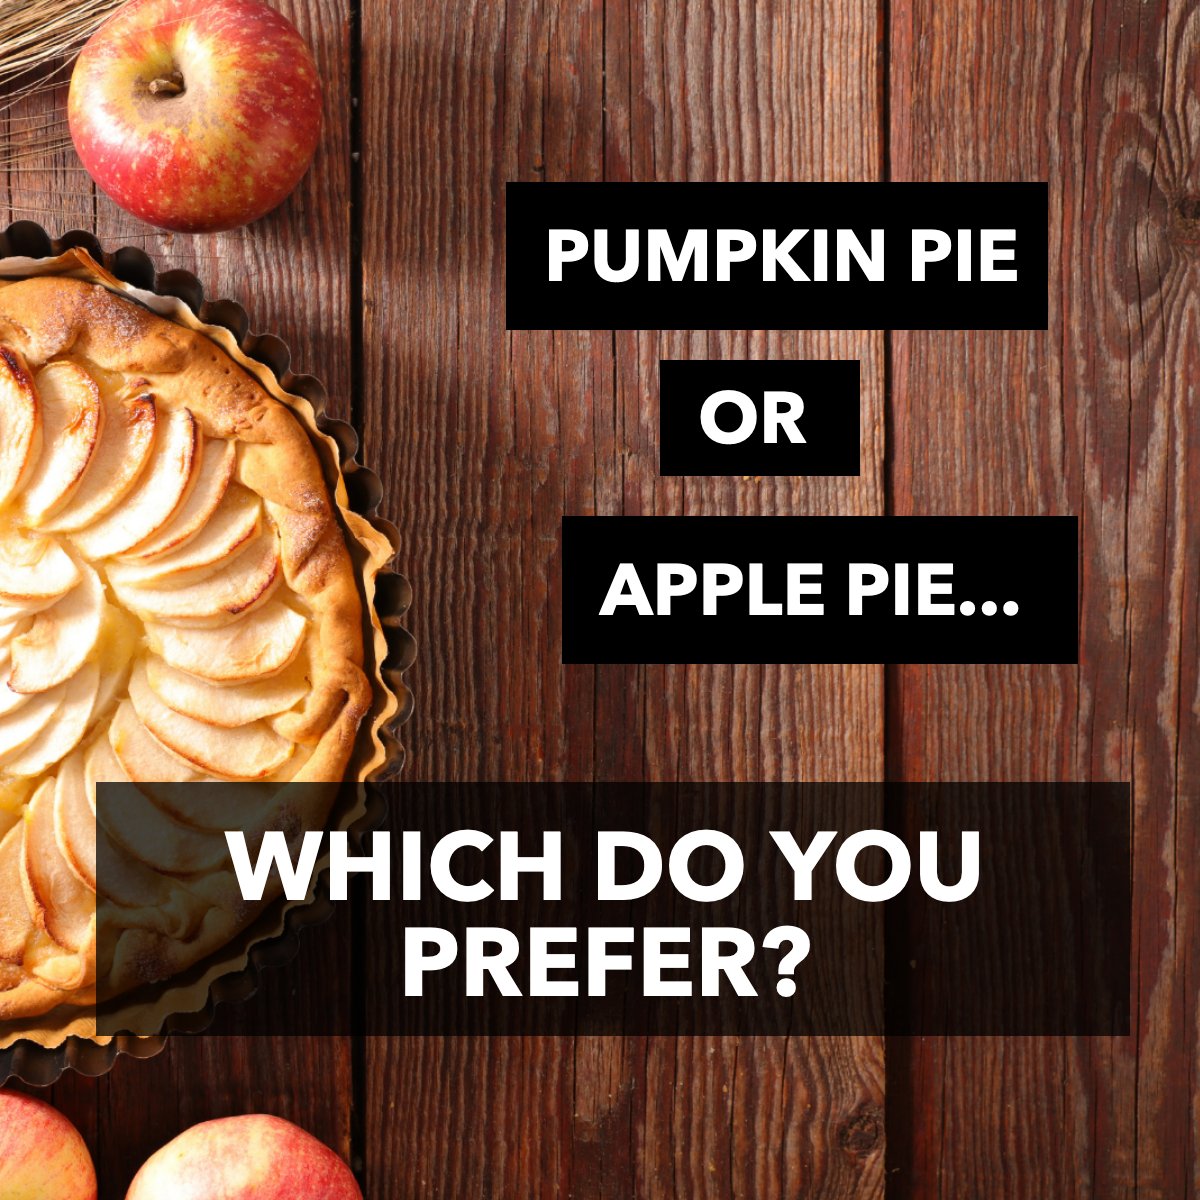 Why is it so difficult to make a choice? 🥧🍎🎃

#pie    #apple    #pumpkin    #pielovers
#RacingRealEstateAgent #BarrettRealEstate #StoneTreeRealEstateTeam #maricopaazrealestate #racingagent #arizonarealestate #phoenixrealestateagent #nascarfanrealtor